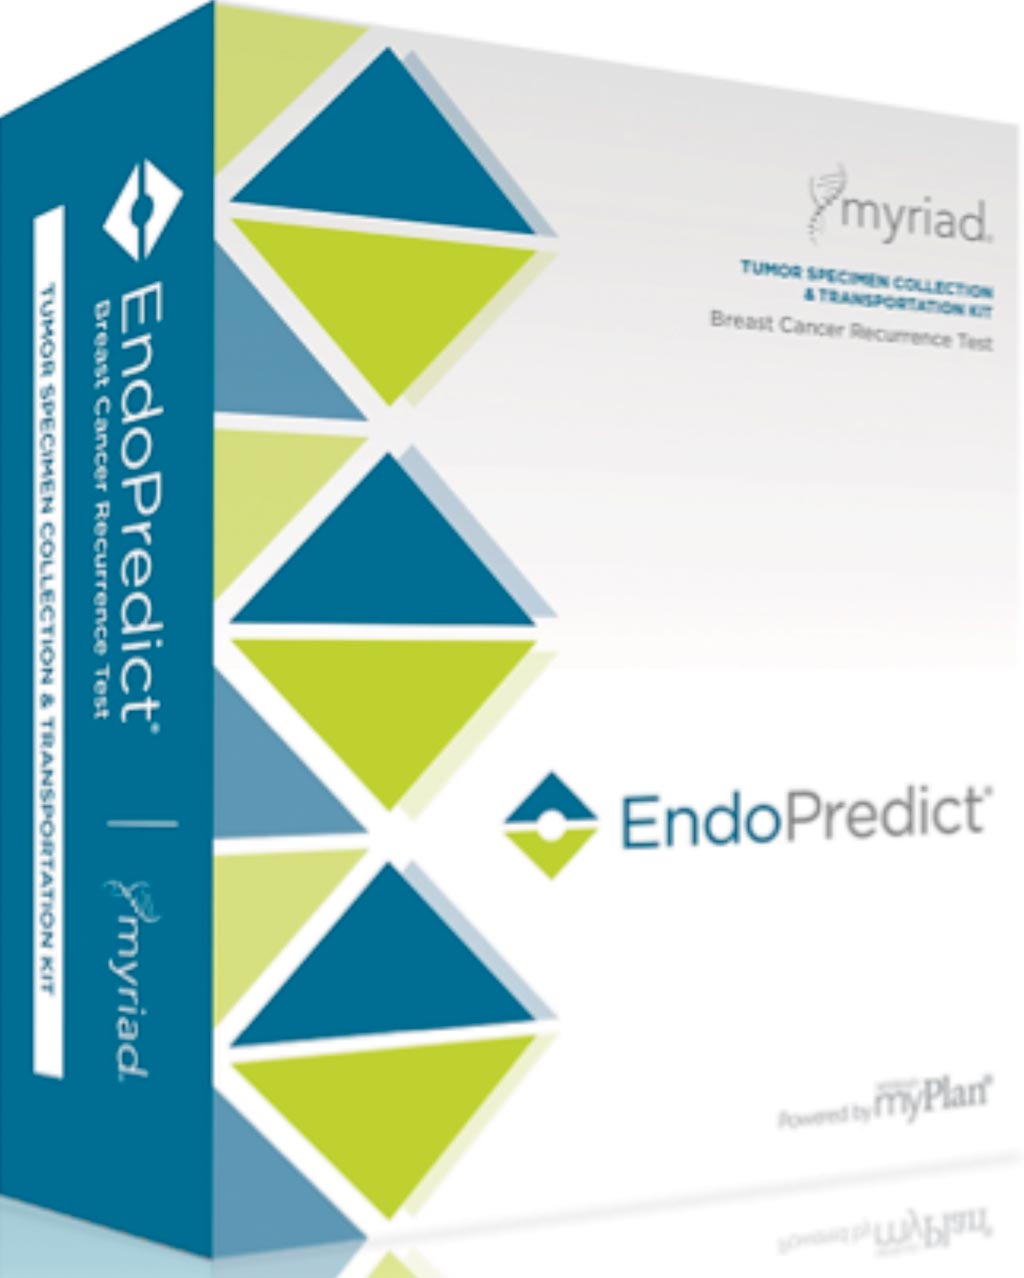 Image: EndoPredict is a next-generation breast cancer recurrence test that integrates tumor biology and pathology to accurately predict early and late (5-15 years) recurrence with an individualized absolute chemotherapy benefit (Photo courtesy of Myriad Genetics).